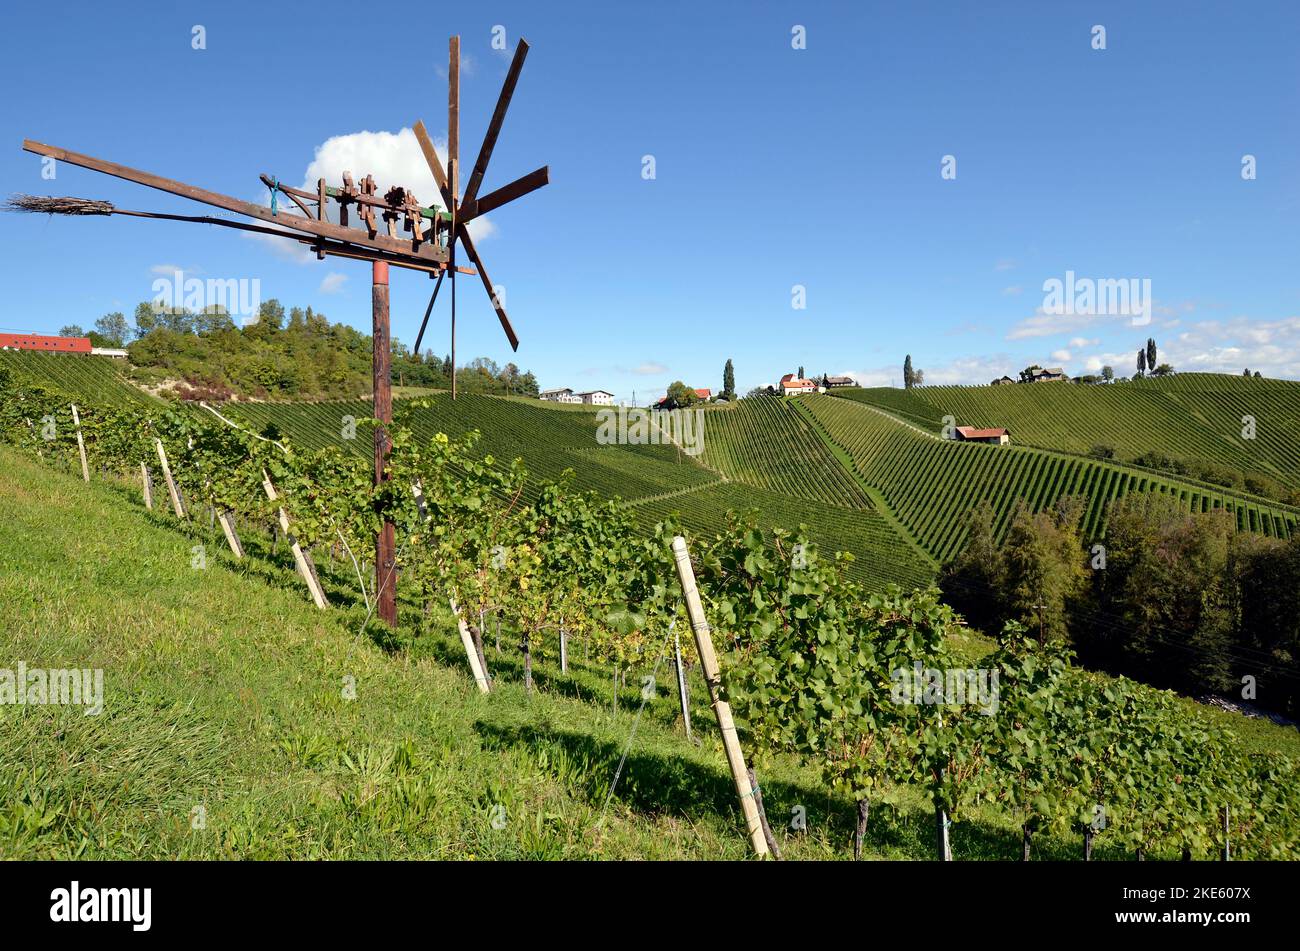 Austria, traditional Klapotez scarecrow and vineyards on the steep slopes located on the Styrian wine route, the hilly landscape is also known as the Stock Photo